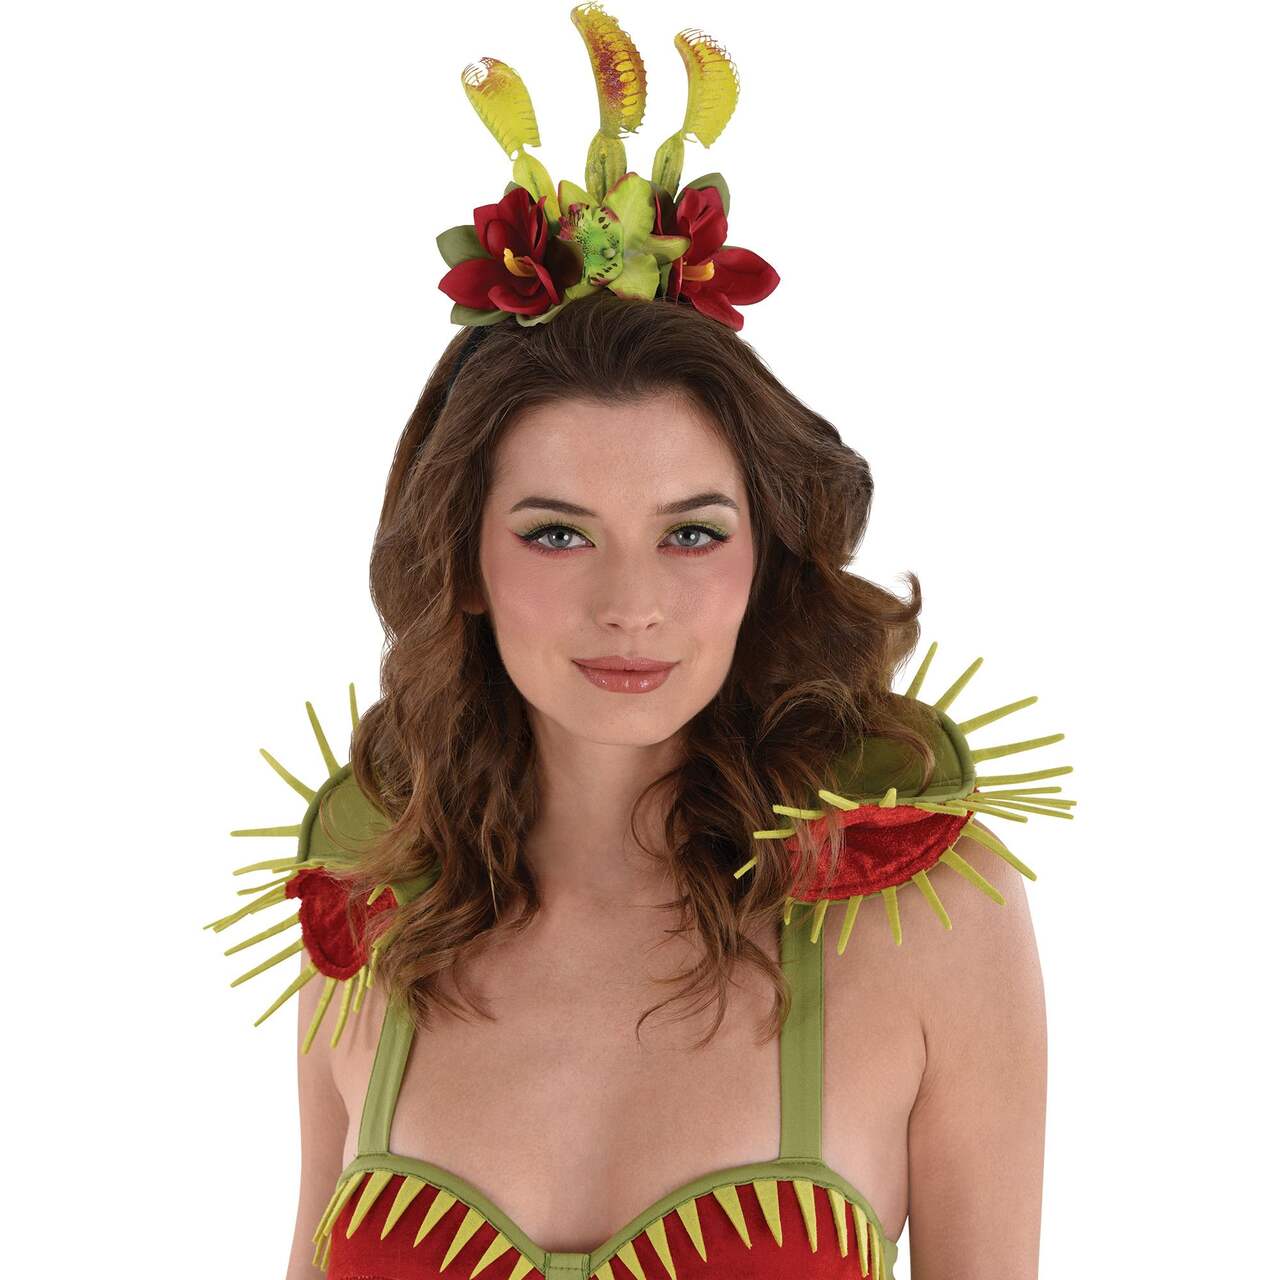 Venus Fly Trap Flower Crown Headband, Green/Red, One Size, Wearable Costume  Accessory for Halloween